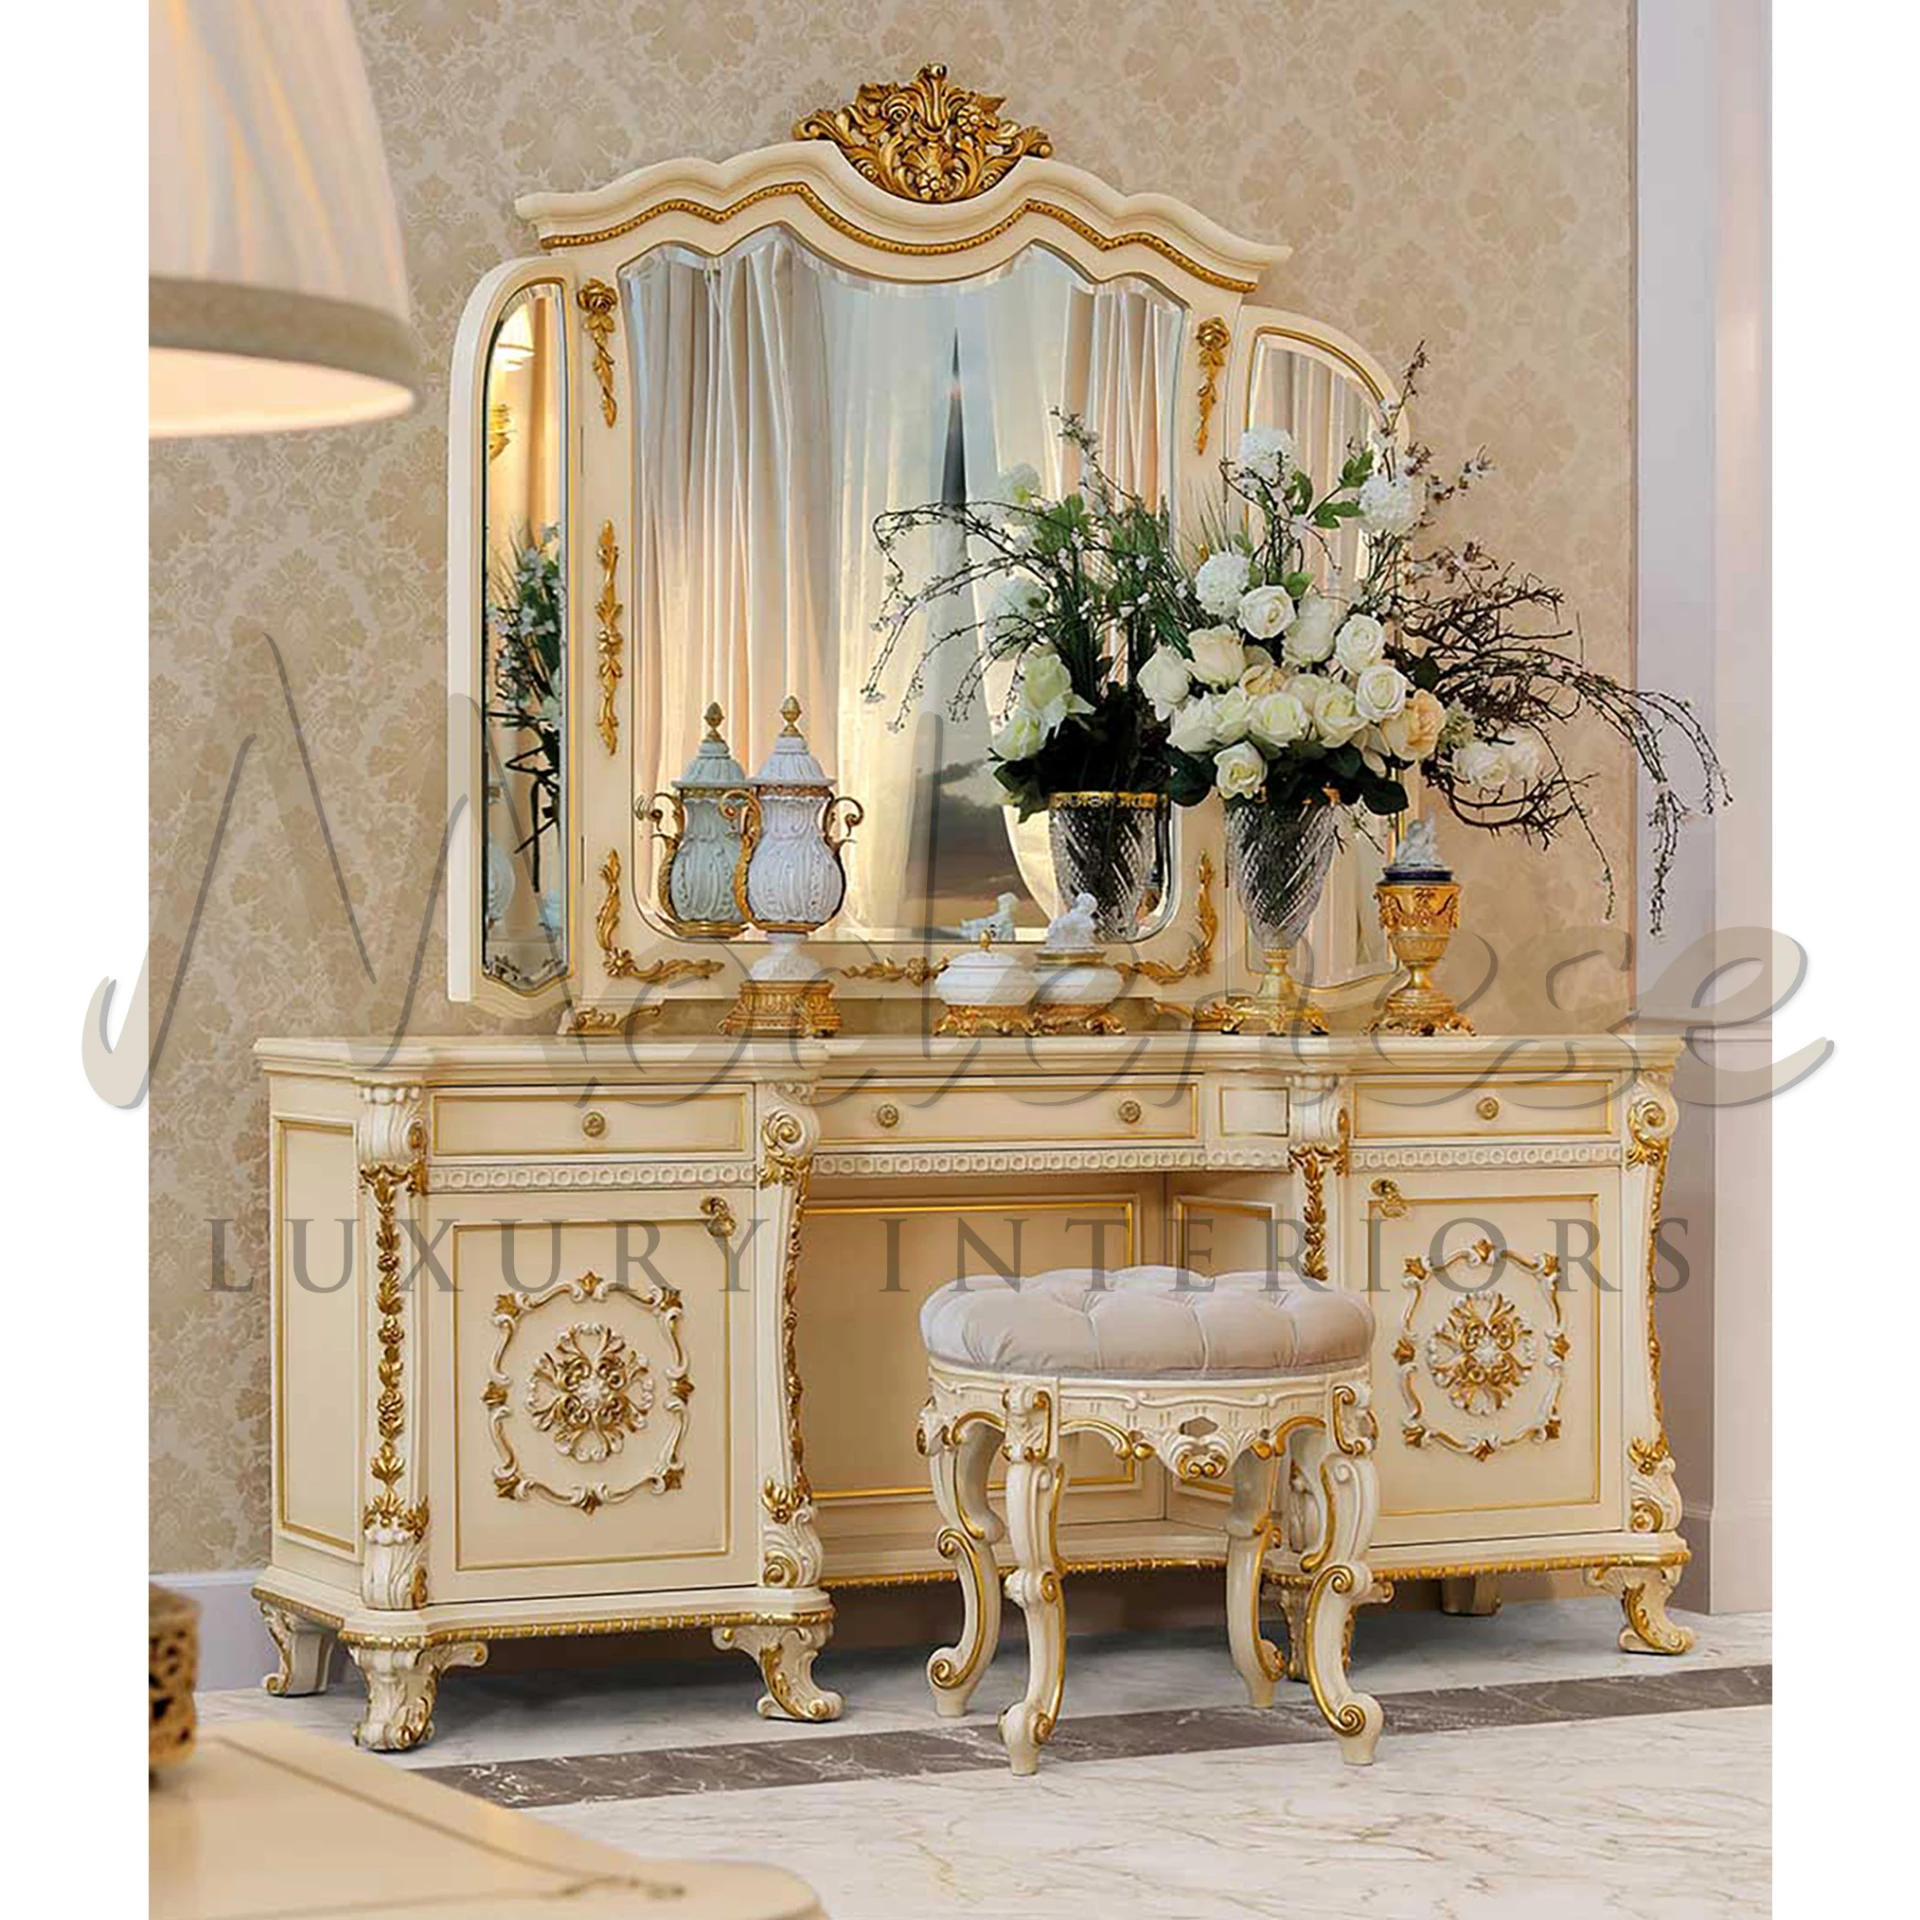 Cream-colored classsical French-style luxurious dressing table with gold ornamental accents and carved cabriole legs created by Italian artisans in Italy